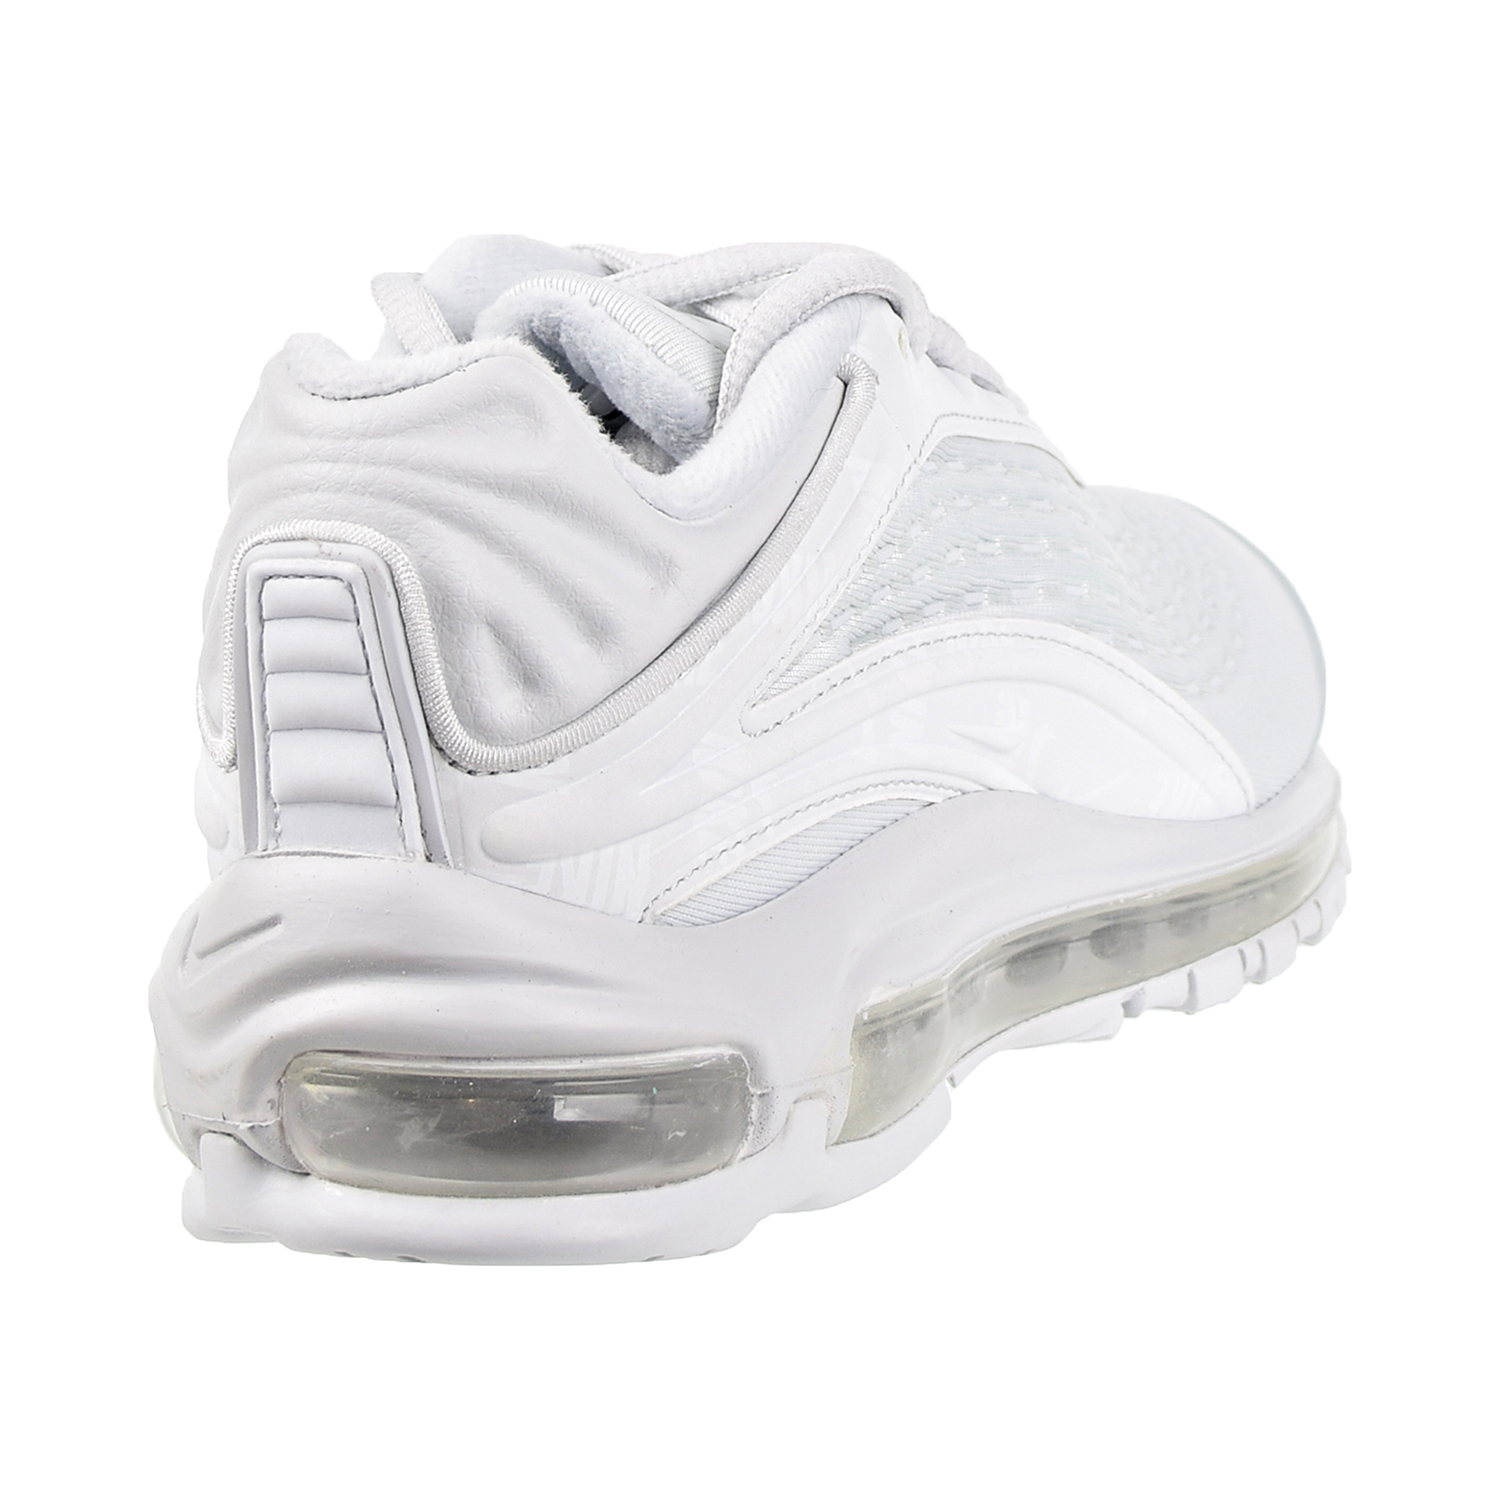 Nike Air Max Deluxe SE Women's Shoes Pure Platinum at8692-002 - image 3 of 6